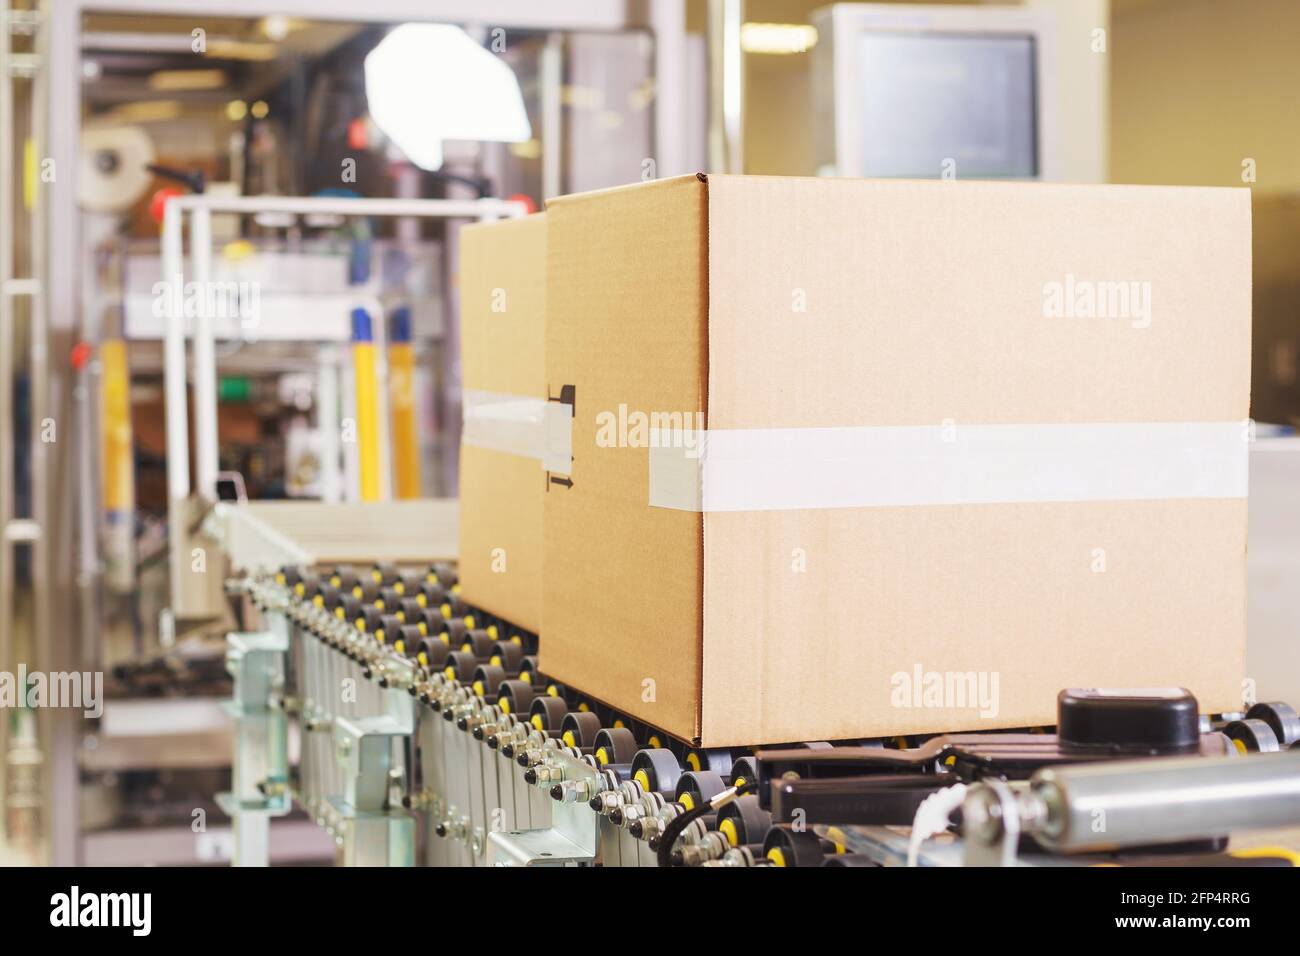 Sealed cardboard box on a conveyor belt in a factory Stock Photo